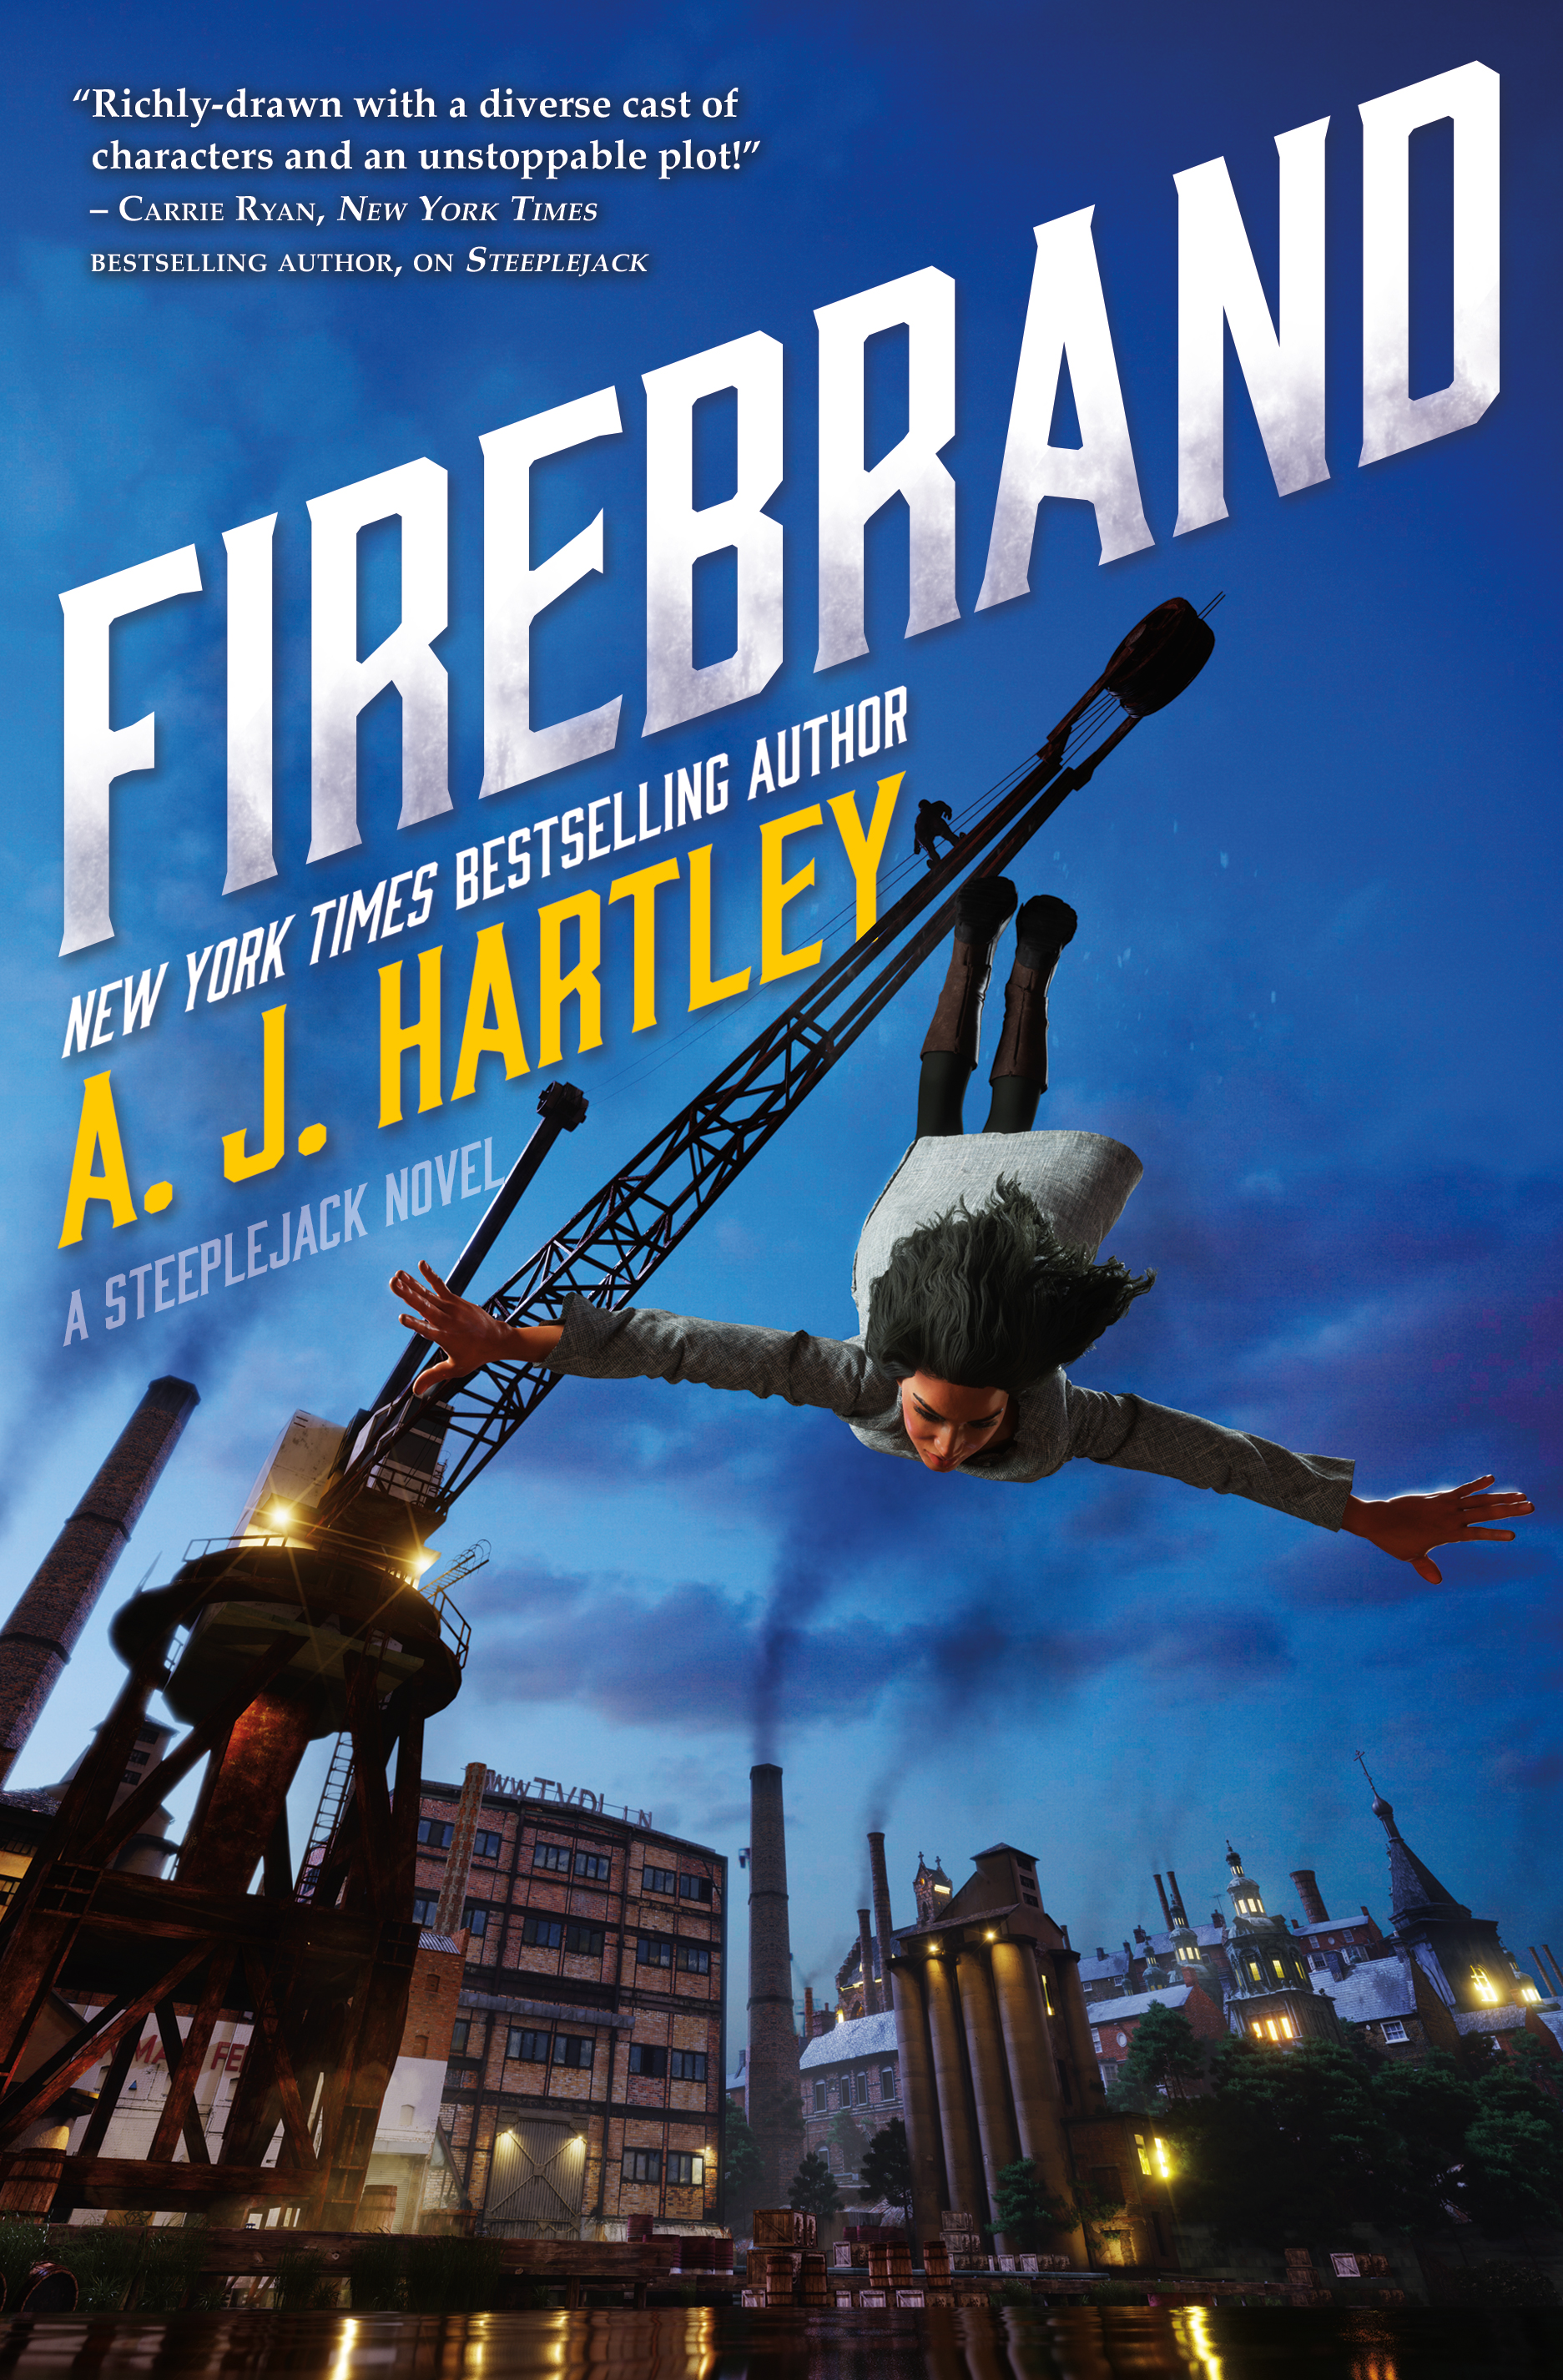 Firebrand : Book 2 in the Steeplejack series by A. J. Hartley